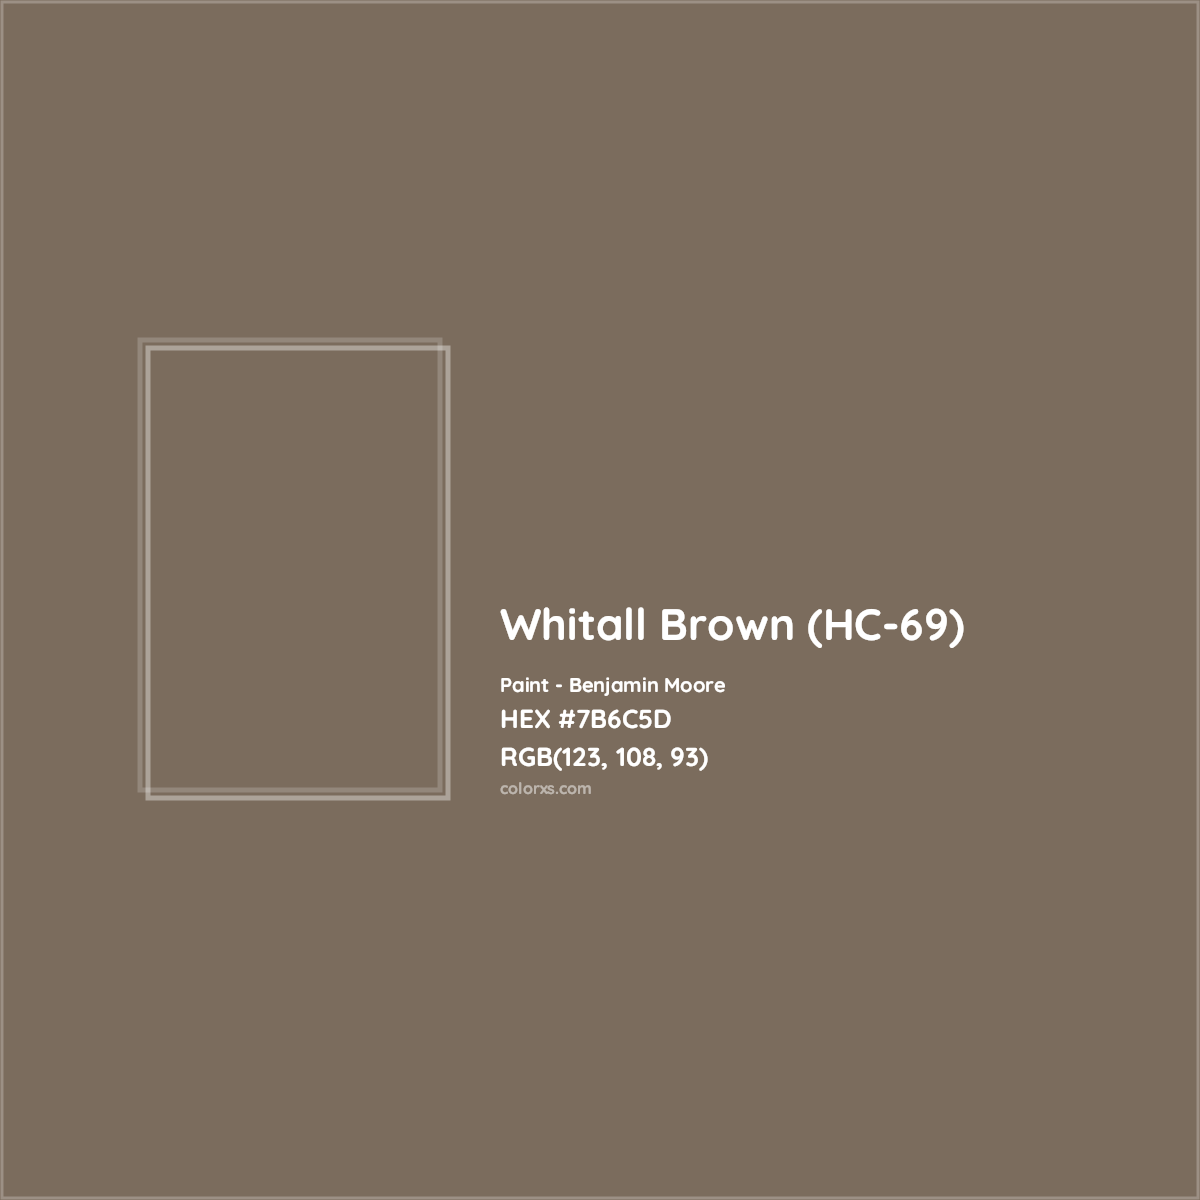 HEX #7B6C5D Whitall Brown (HC-69) Paint Benjamin Moore - Color Code